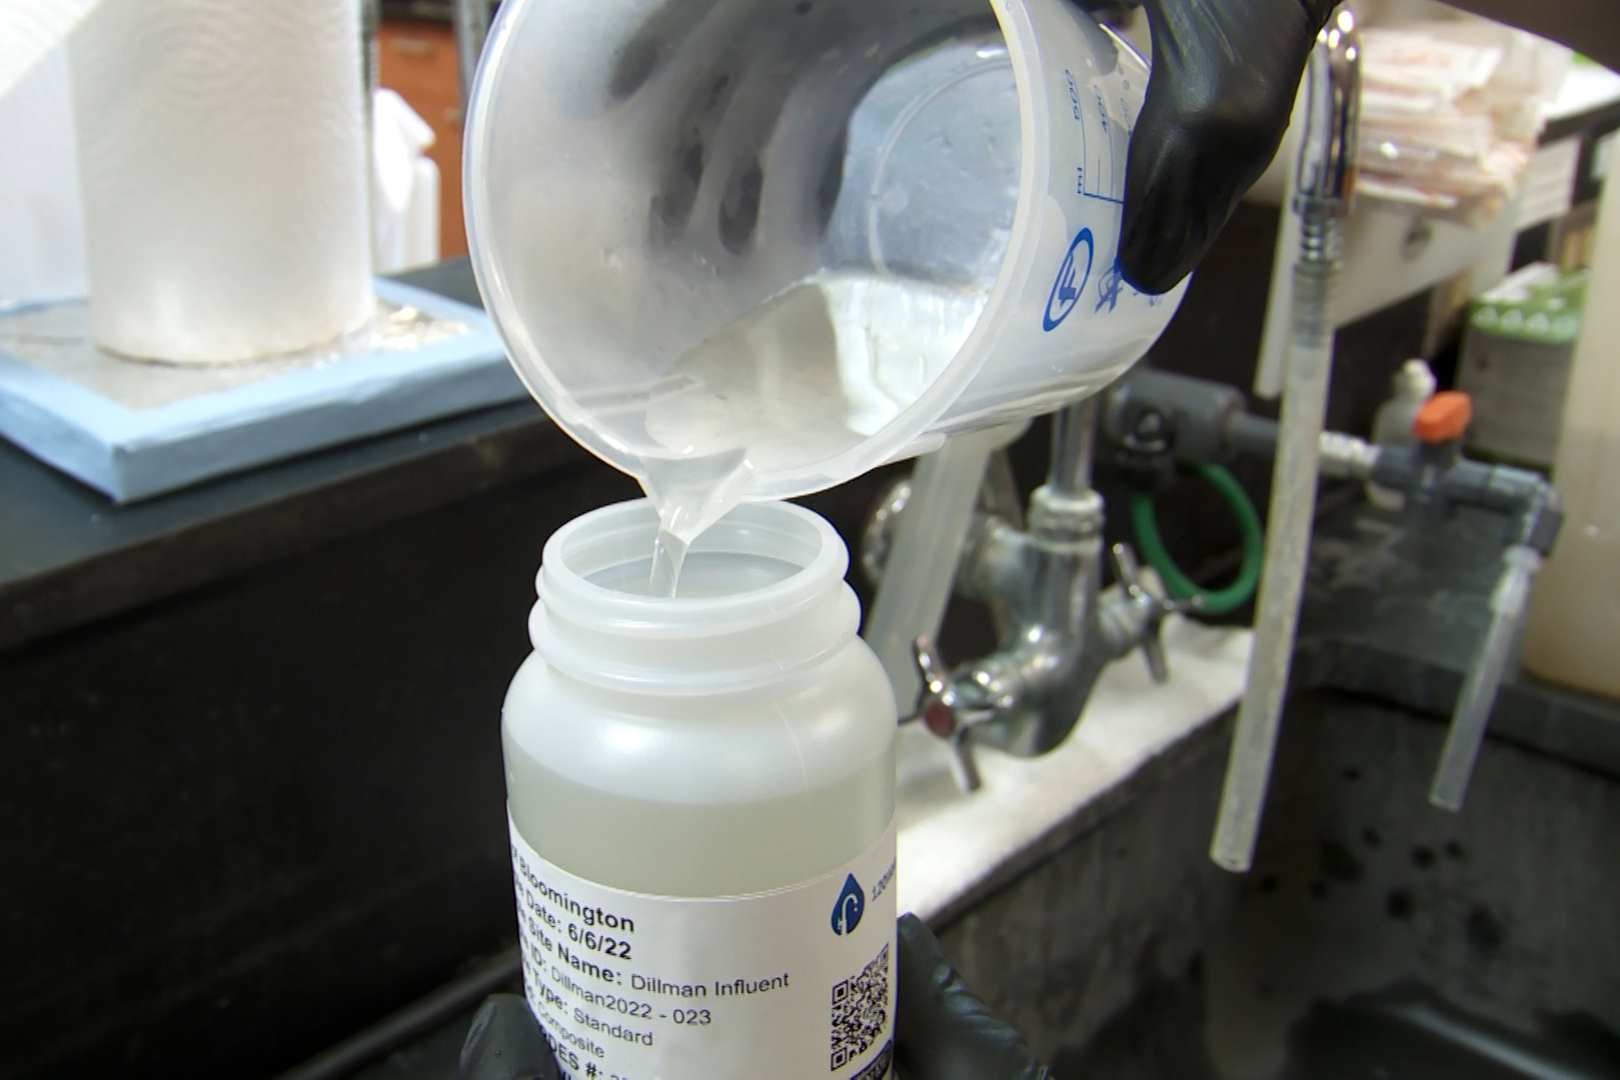 Wastewater is prepared for testing in a lab